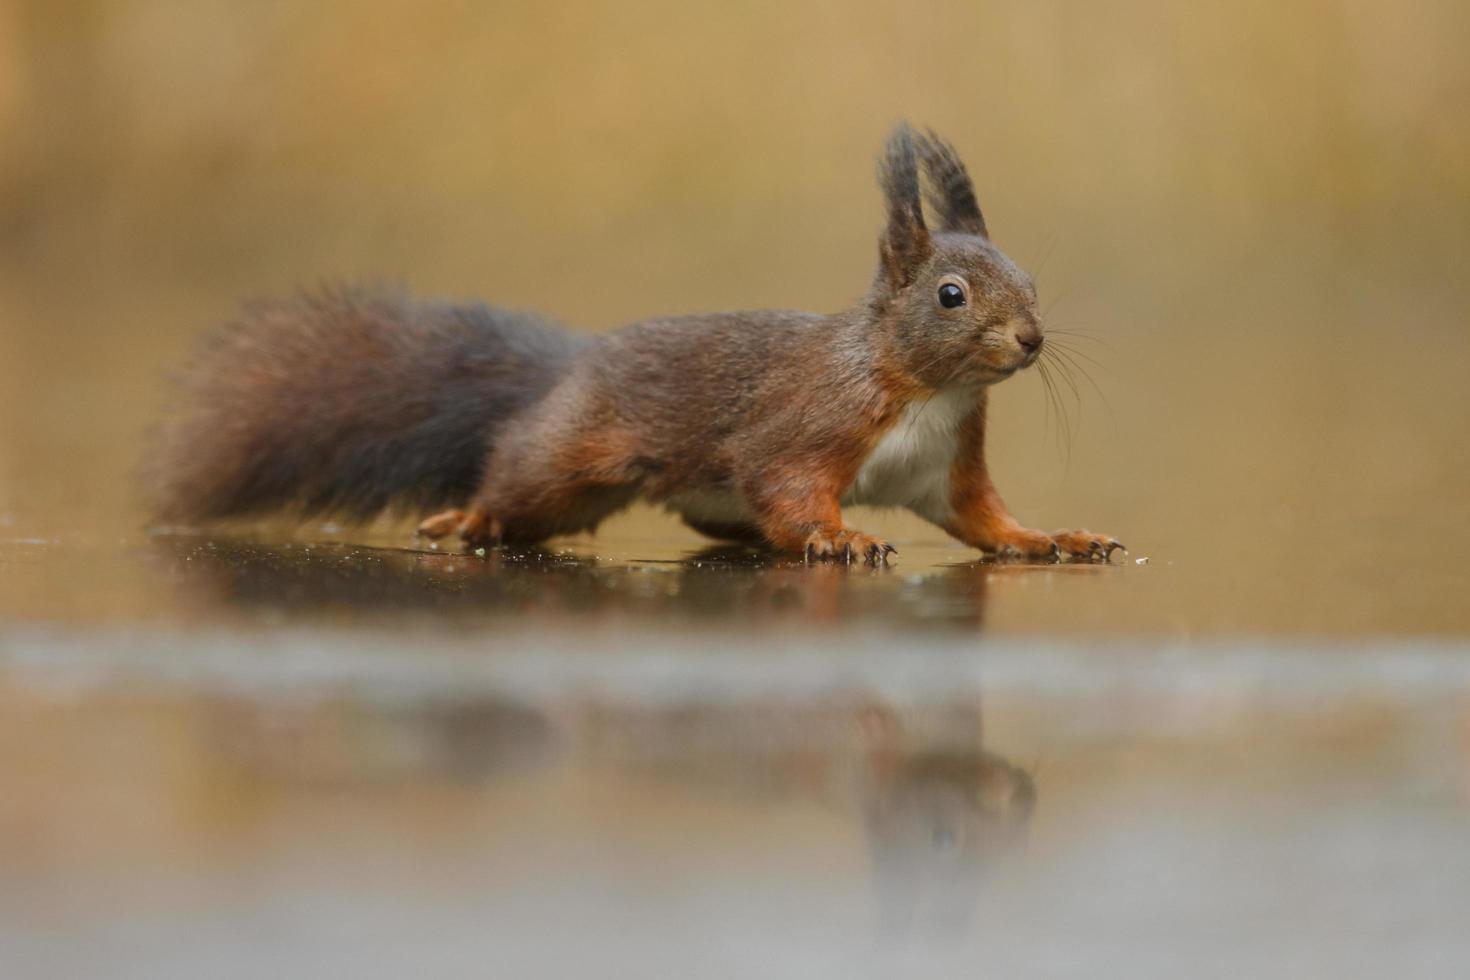 Red Squirrel in a forest photo